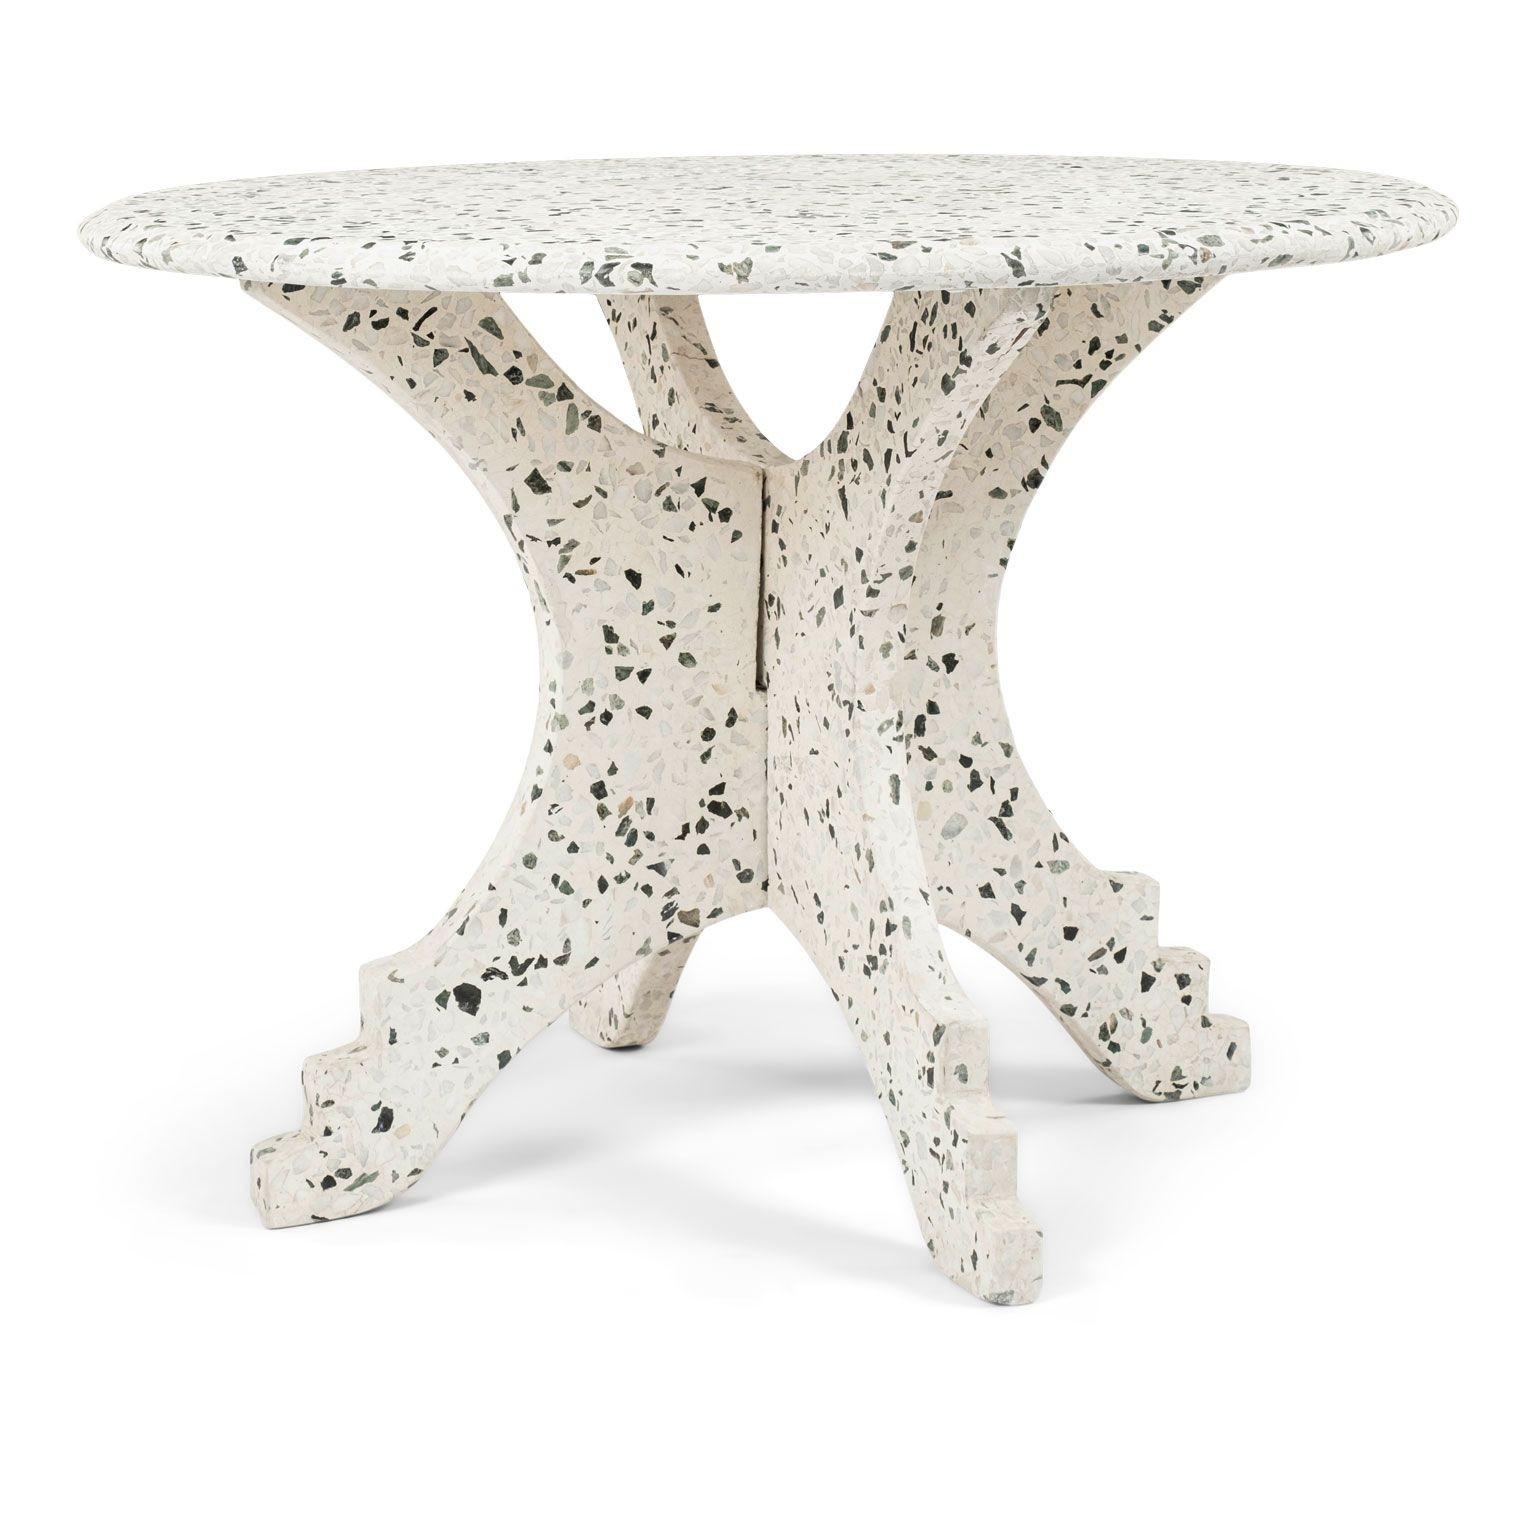 Carved Large Round Vintage Blue and White Terrazzo Table For Sale